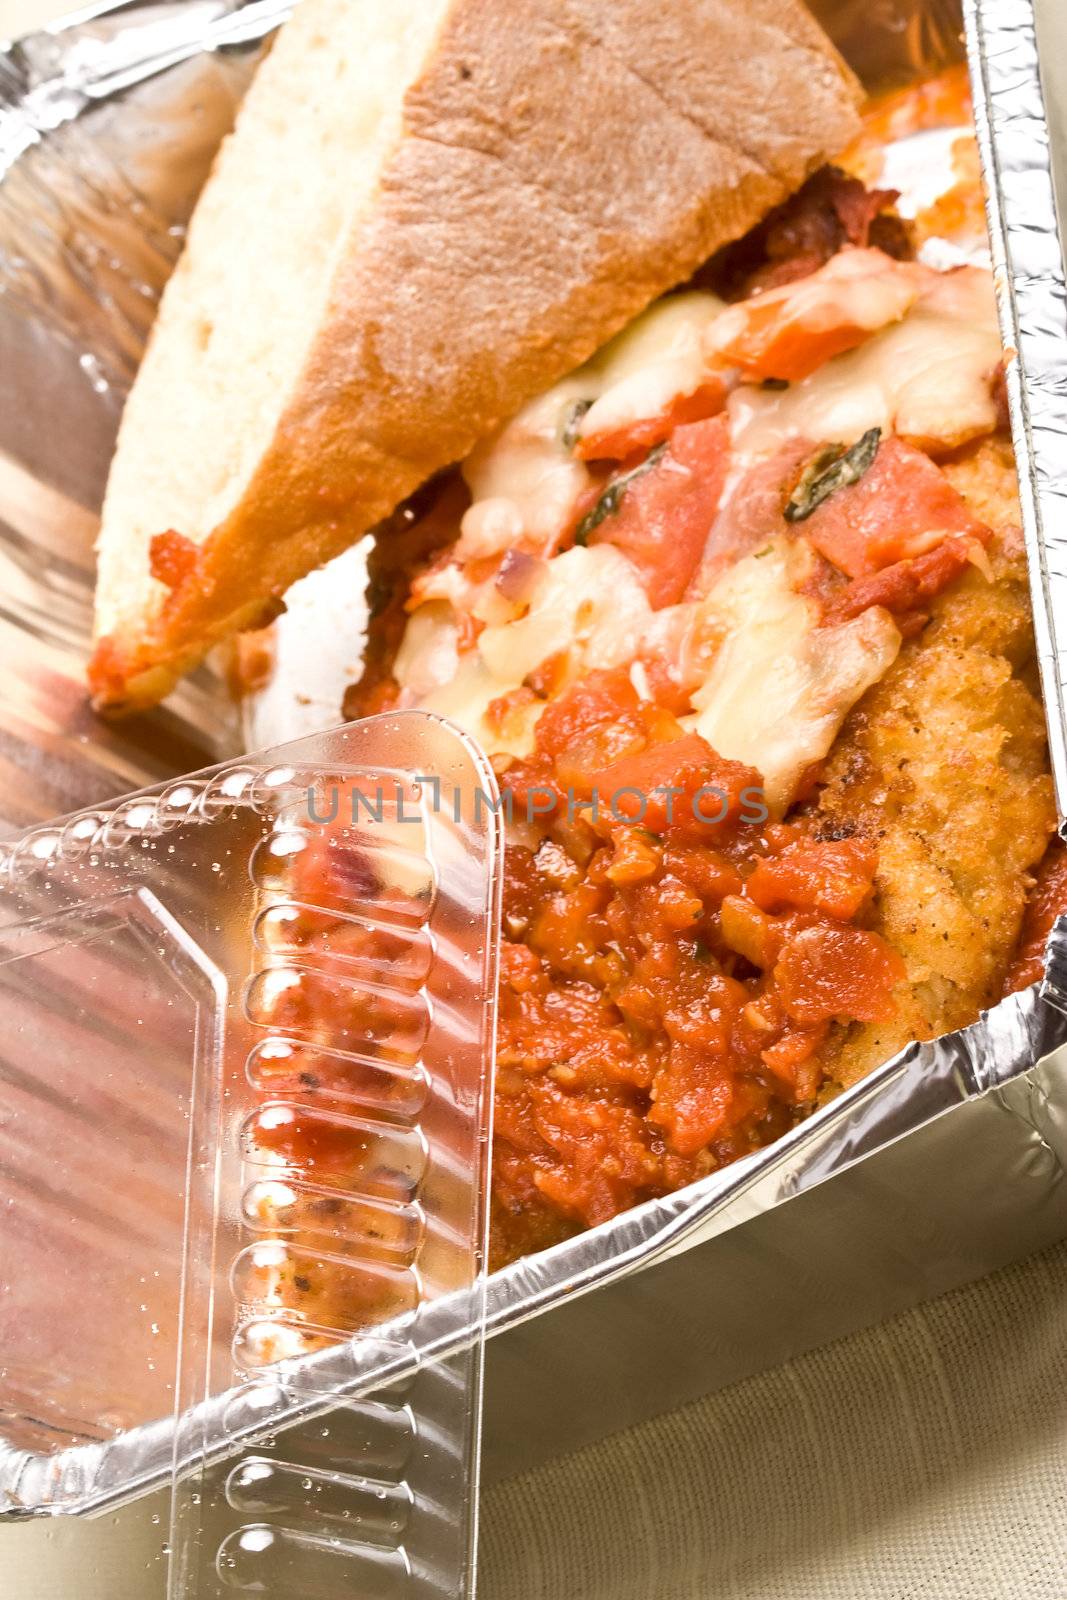 carry out meal chicken parmesan with a slice of bread in the carry out container